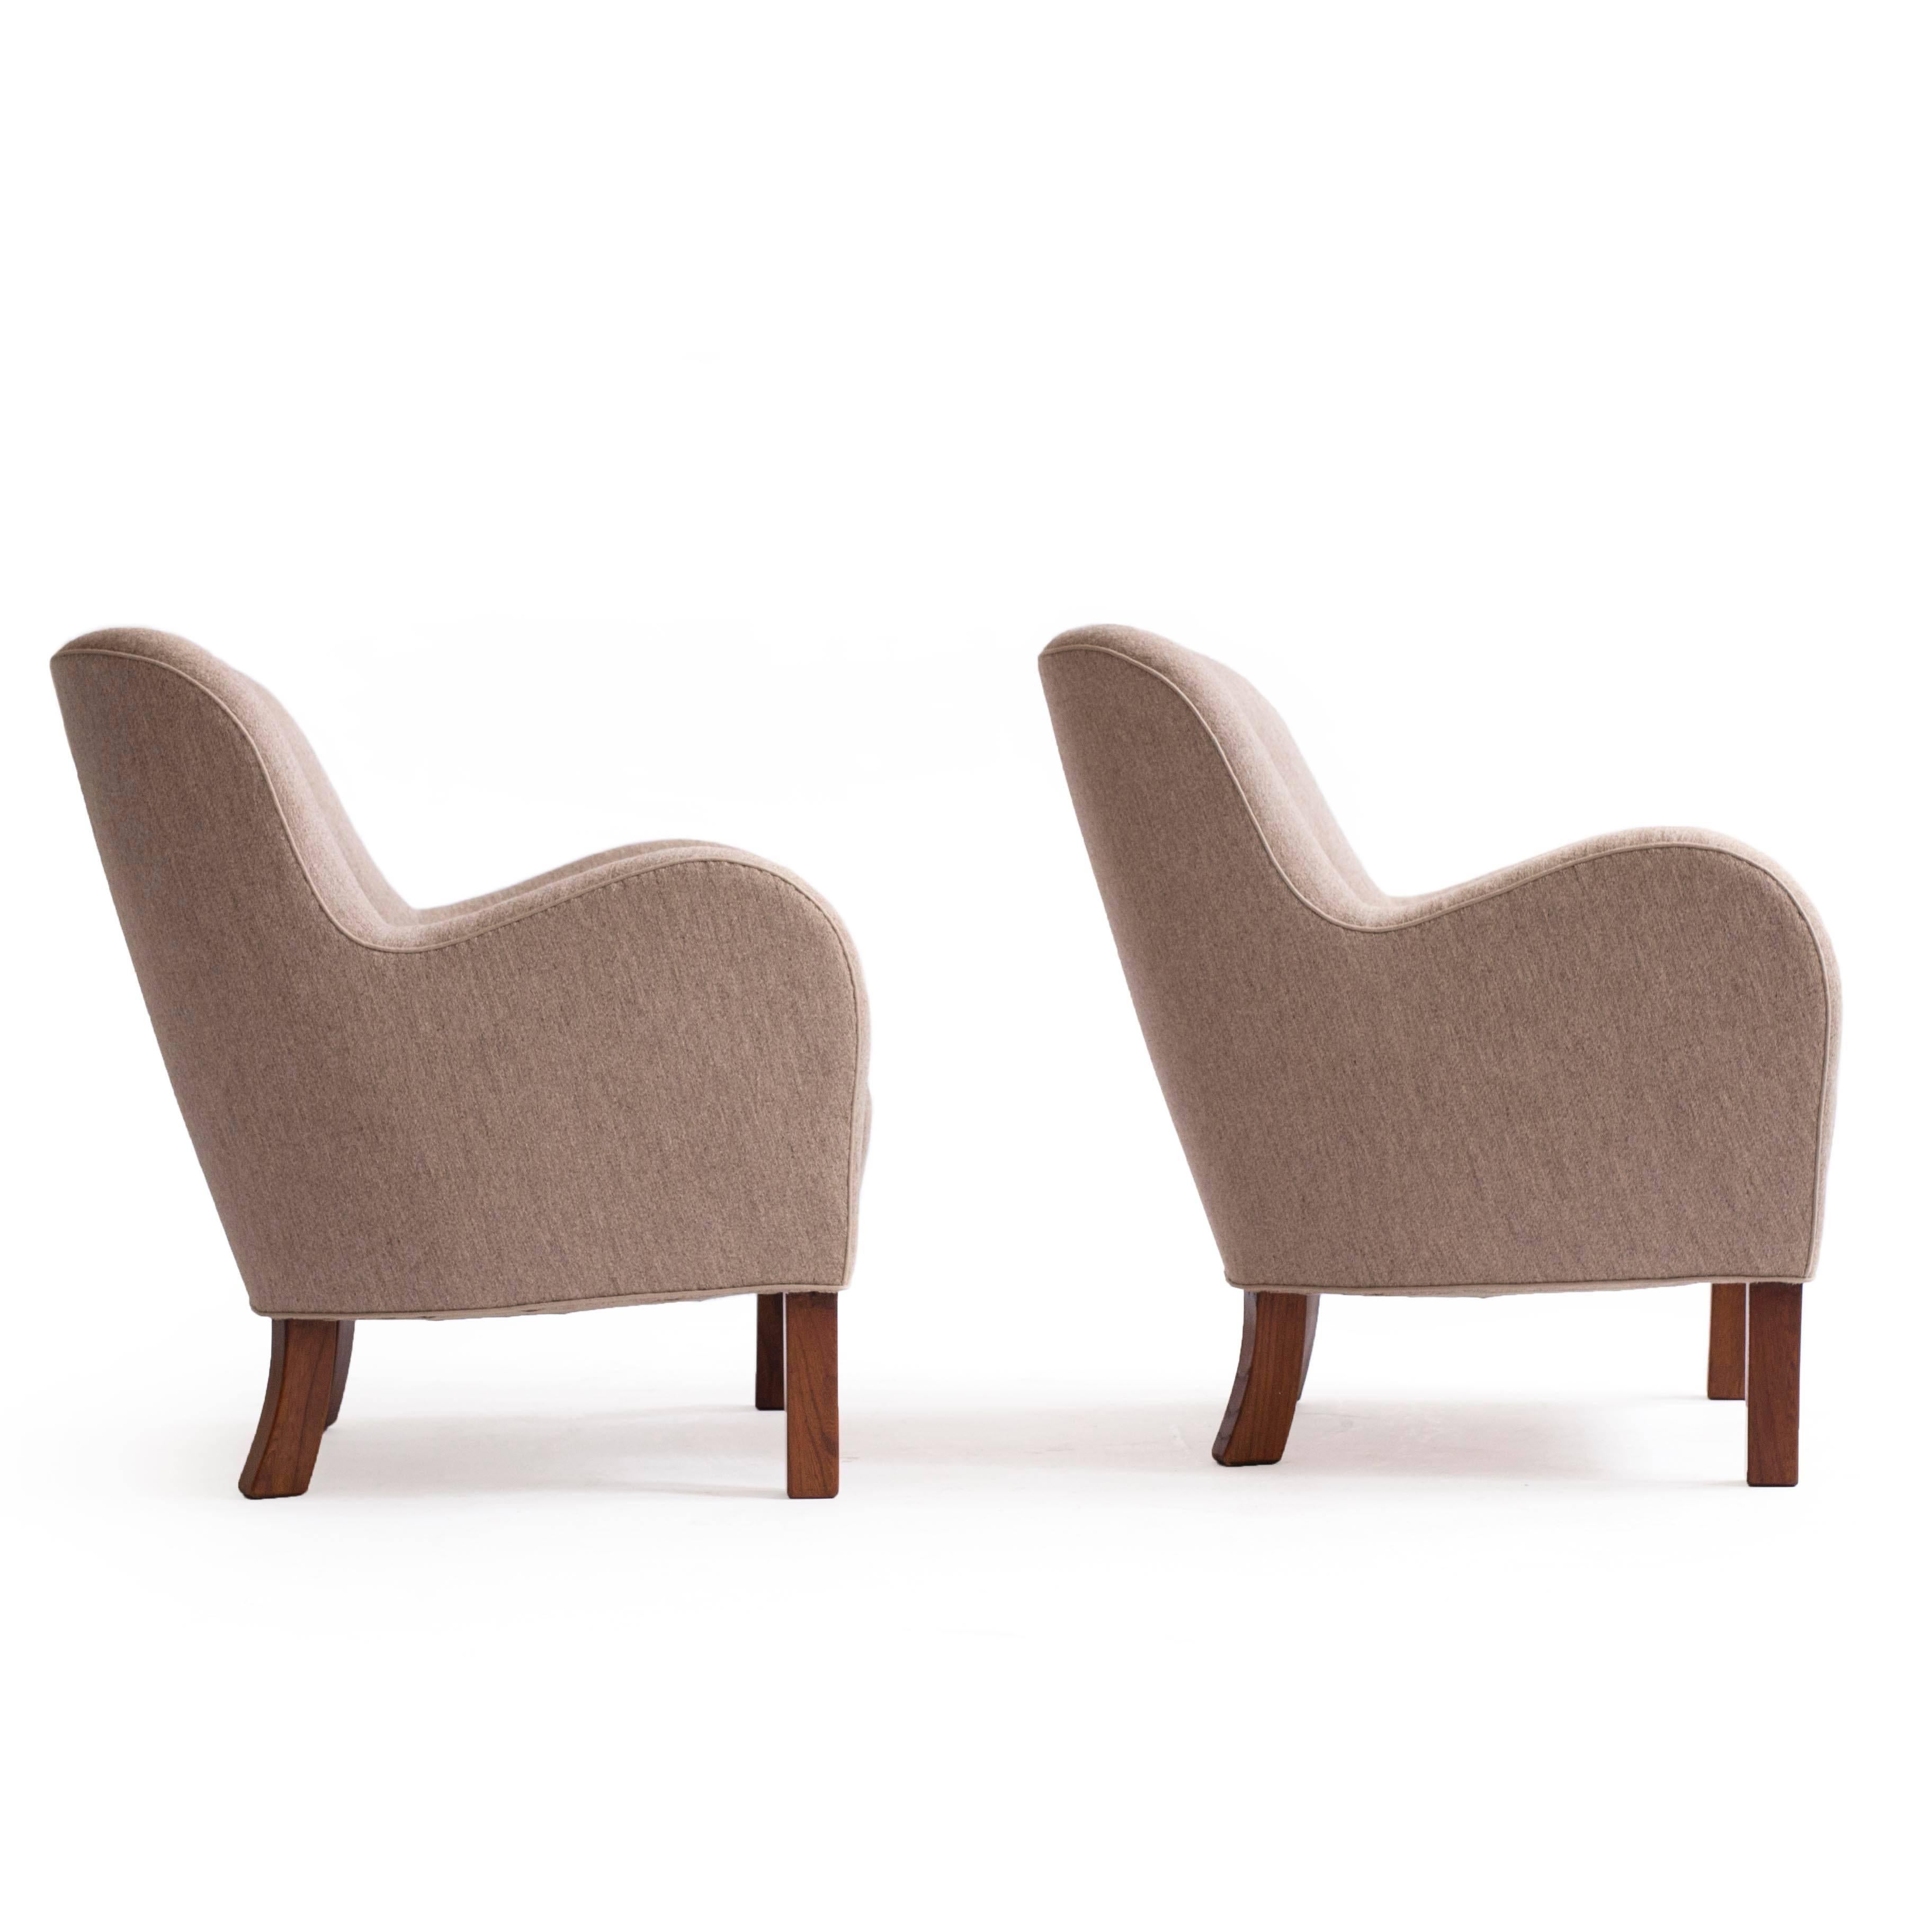 A pair of Palle Suenson easy chairs with legs of stained wood, upholstered with soft brown savak fabric fitted with buttons. 

Designed by Suenson and made by Fritz Hansen, Denmark app. 1935.